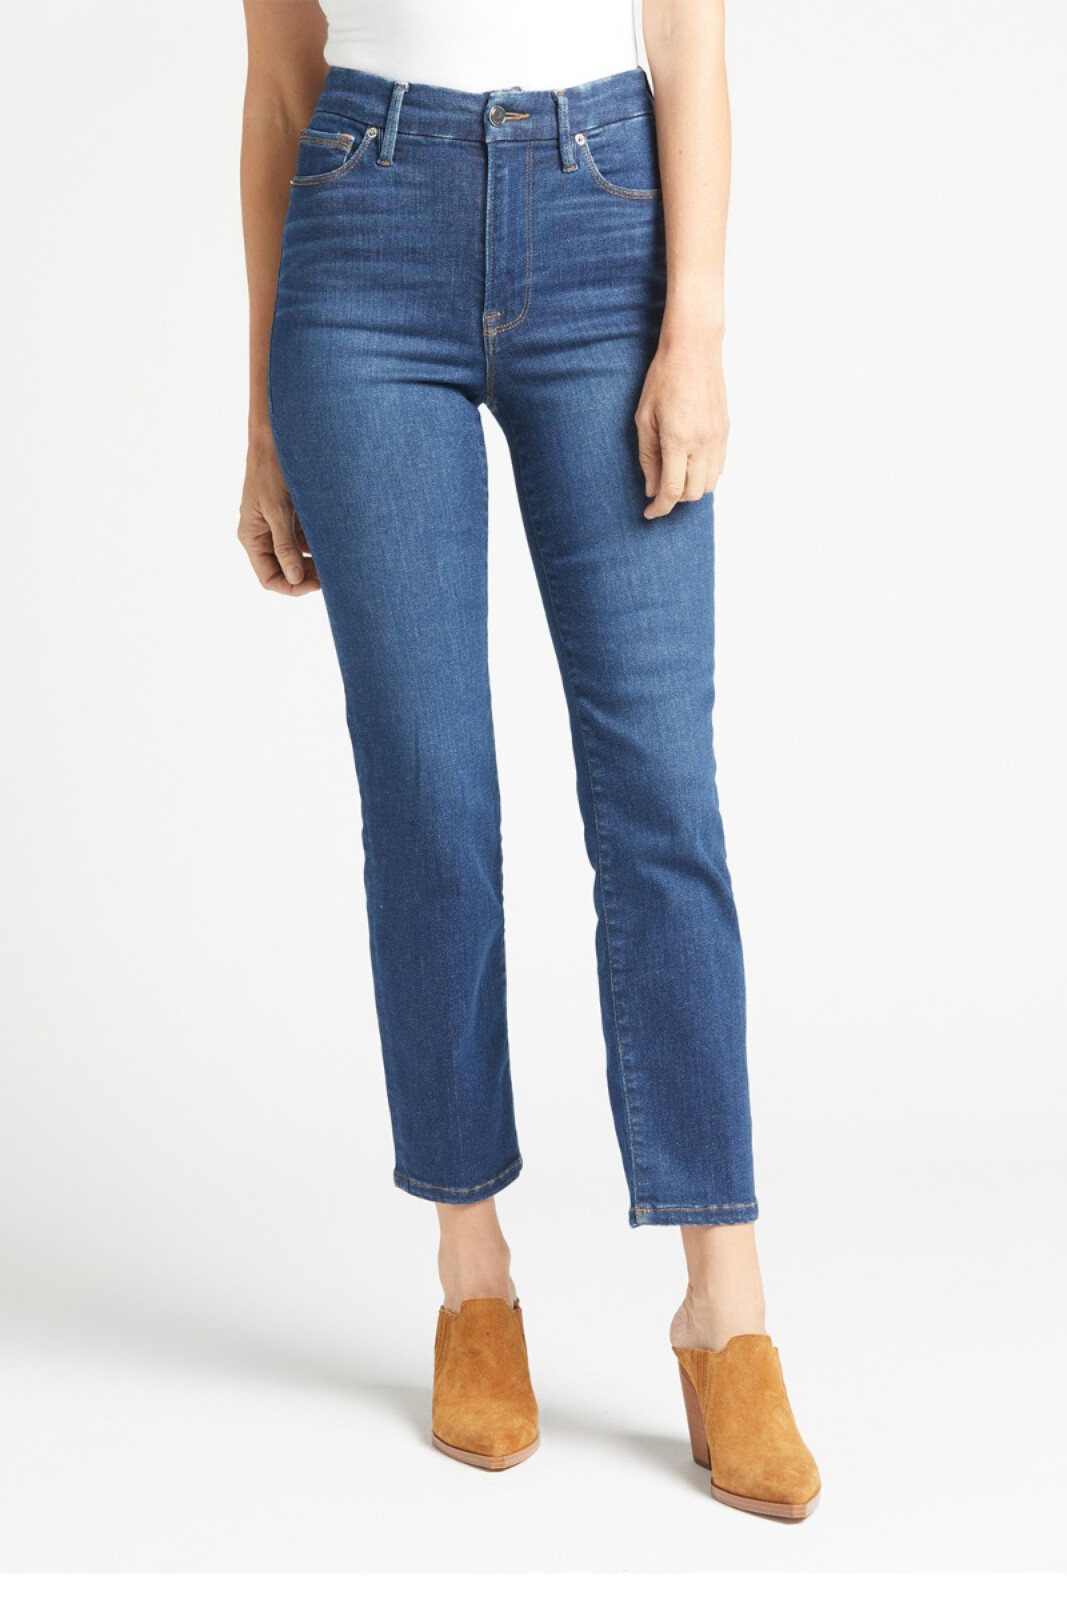 Super Stretch Jeans: Good American Always Fits Good Classic, If You Need  Denim With Stretch, You've Come to the Right Place